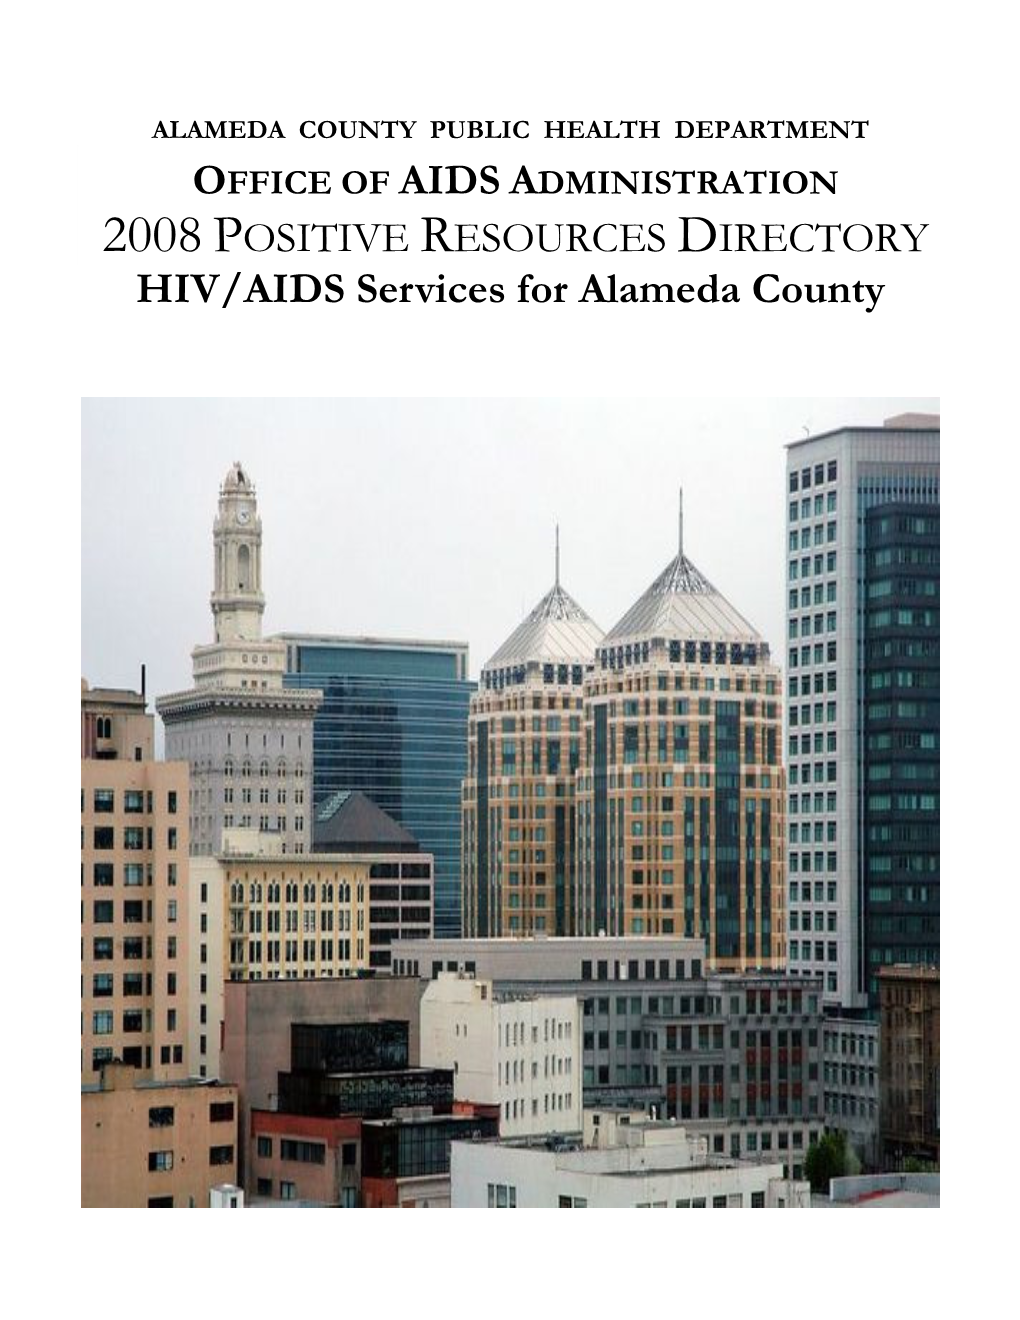 HIV/AIDS Services for Alameda County